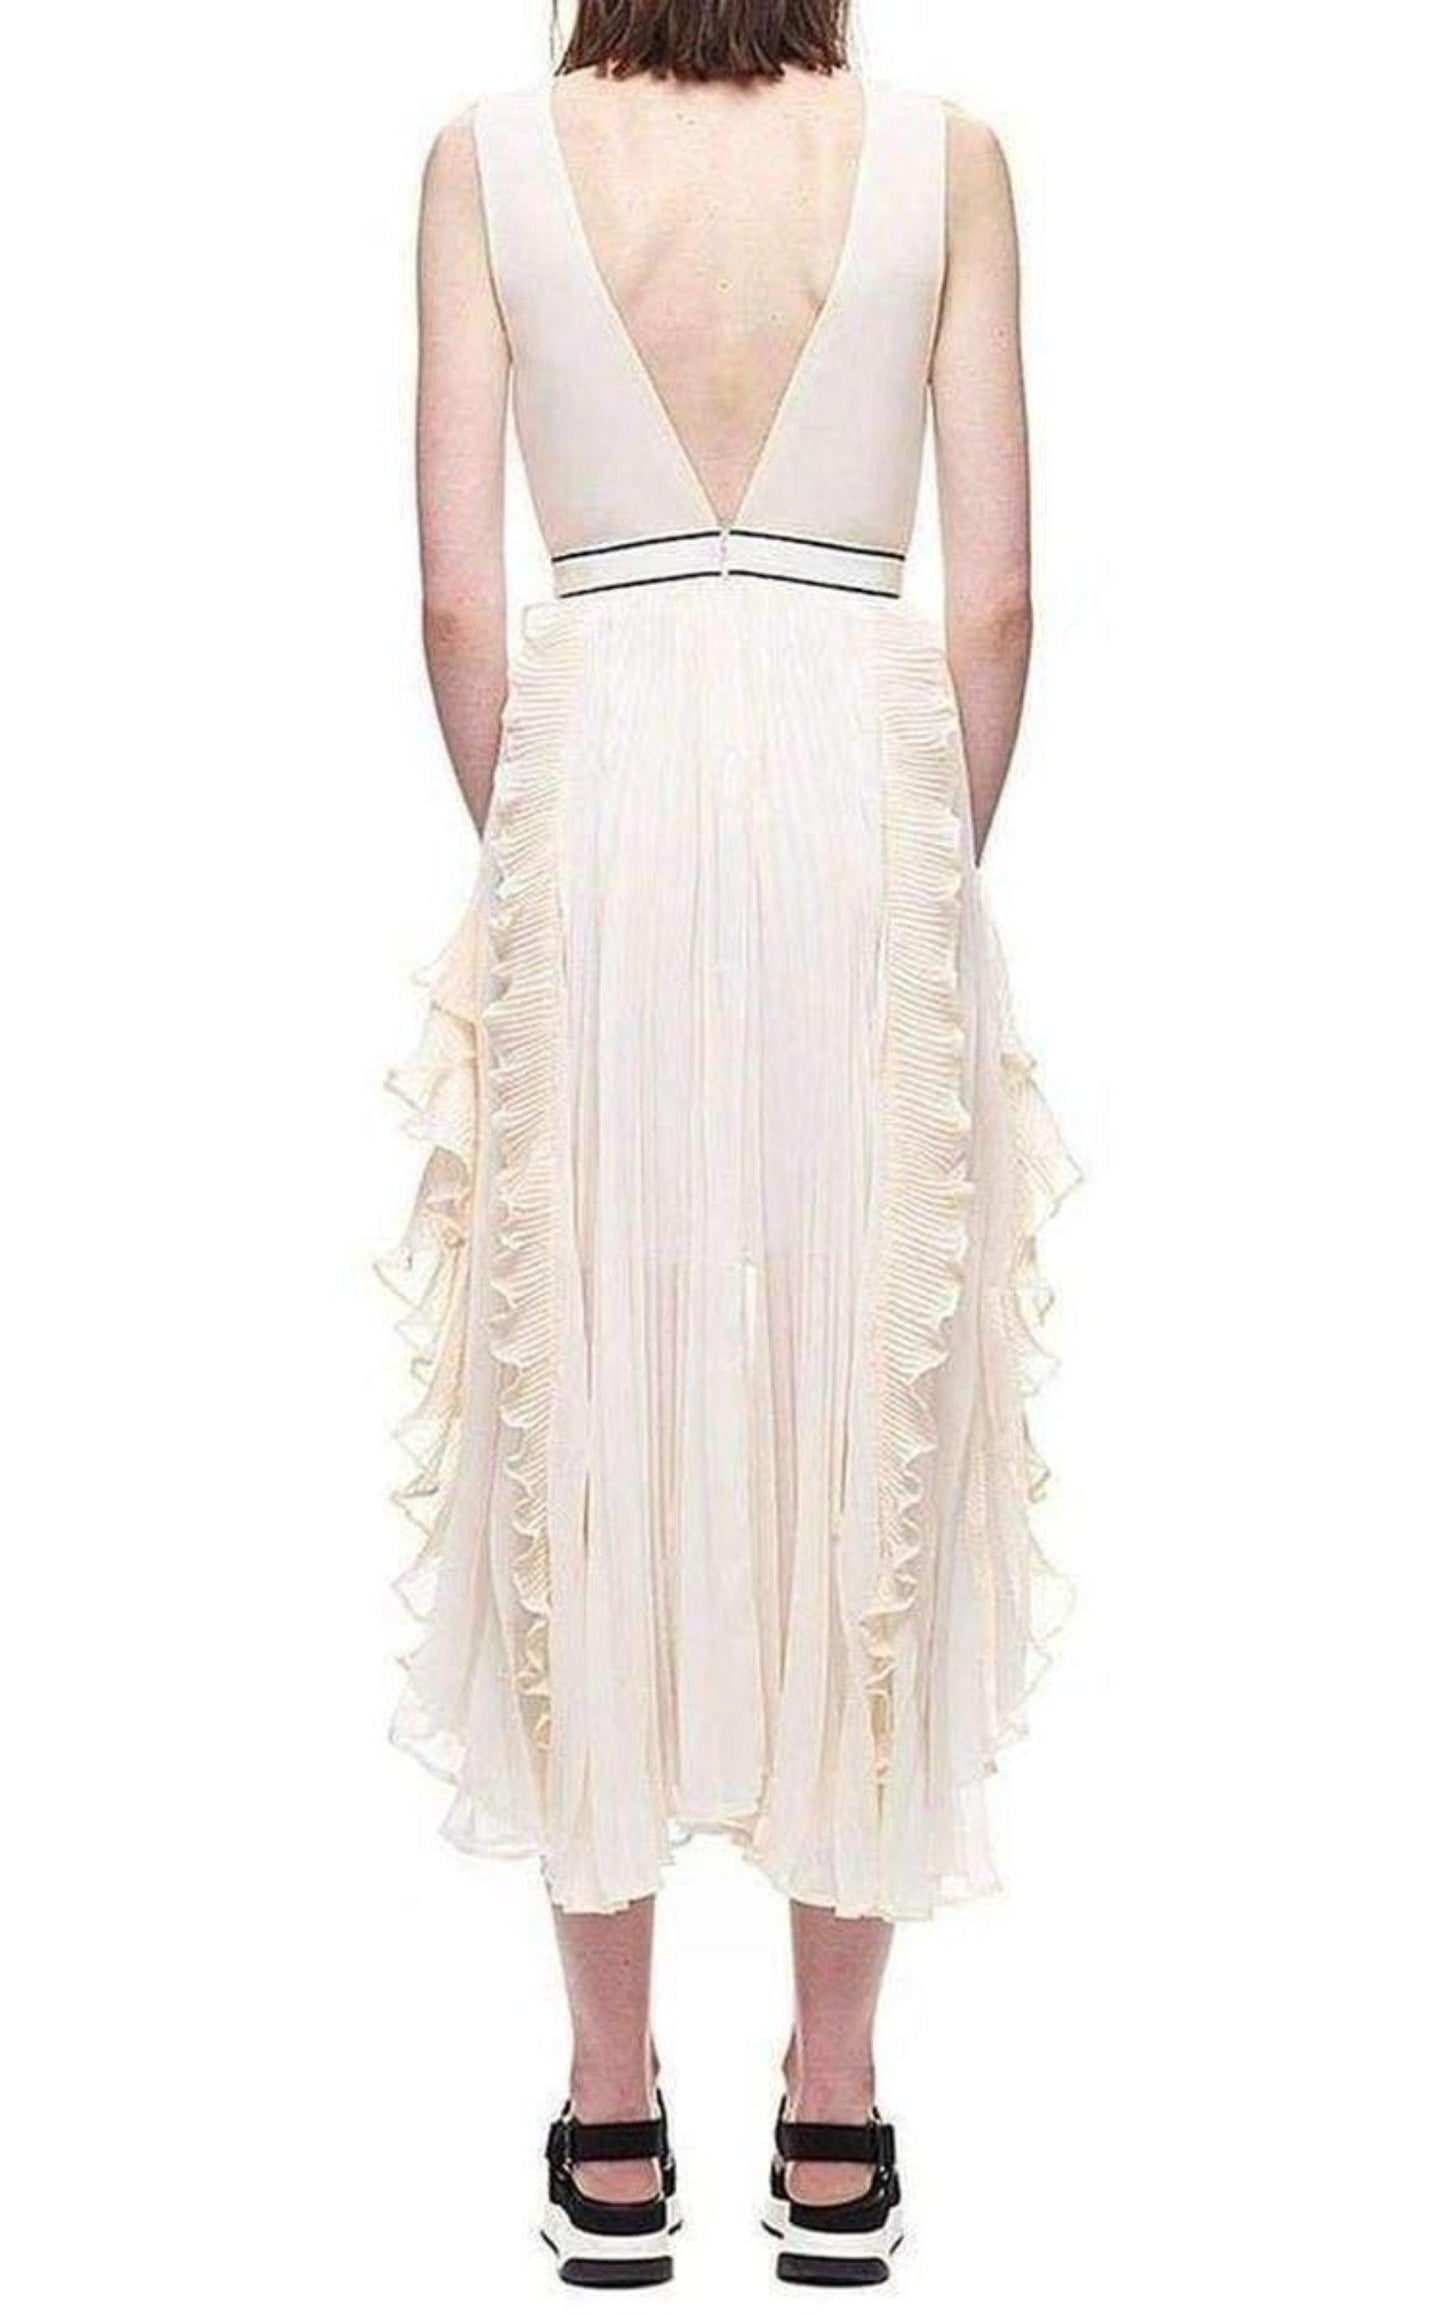  Self-PortraitV-Neck Dress with Fluted Pleats - Runway Catalog